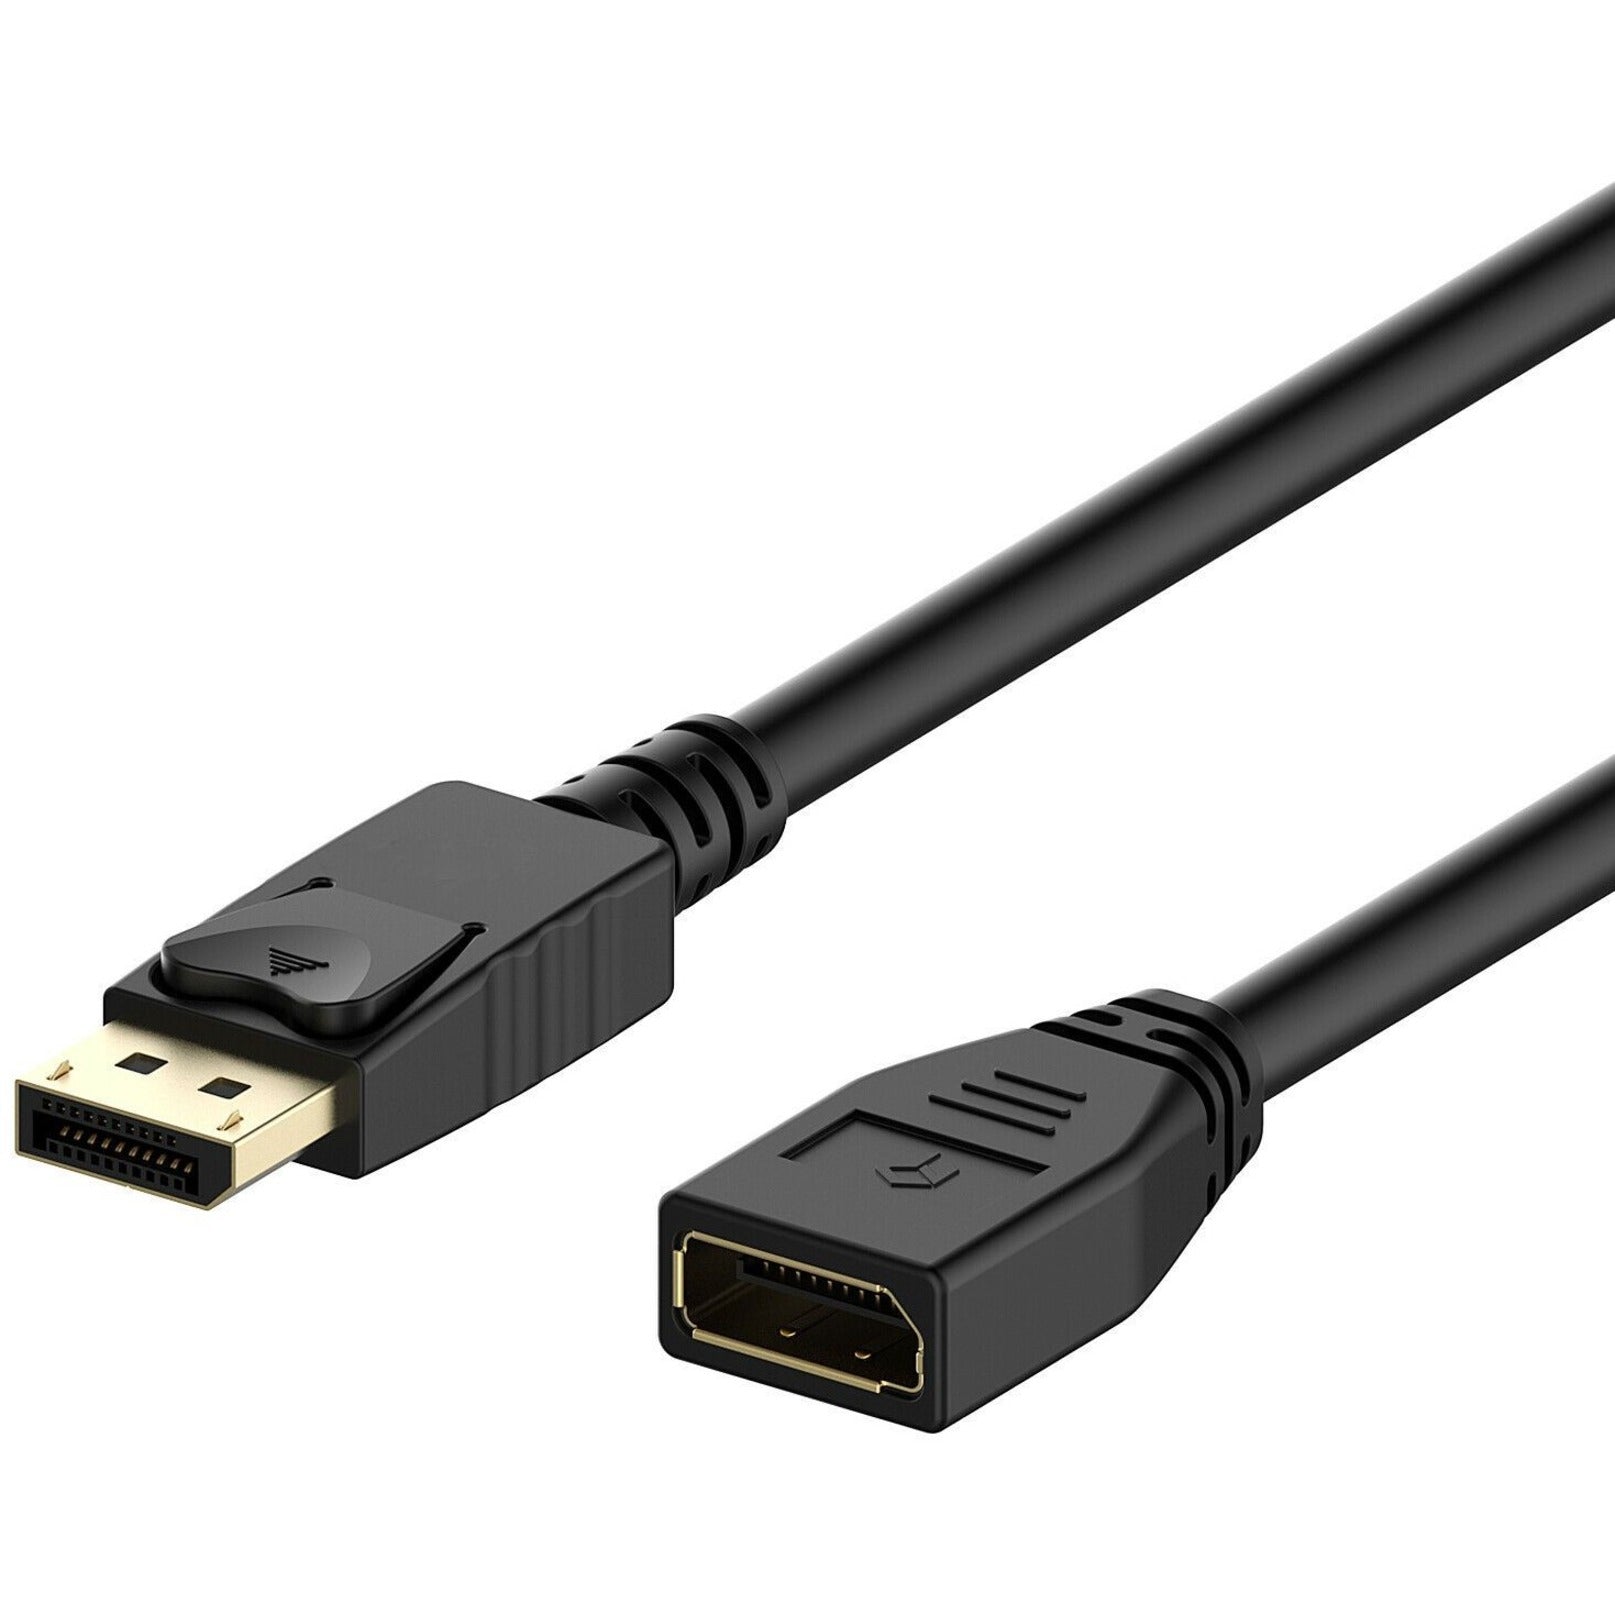 4XEM 4XDPEXT6 DisplayPort 6 ft Extension Cable, Strain Relief, HDCP, 10.8 Gbit/s Data Transfer Rate